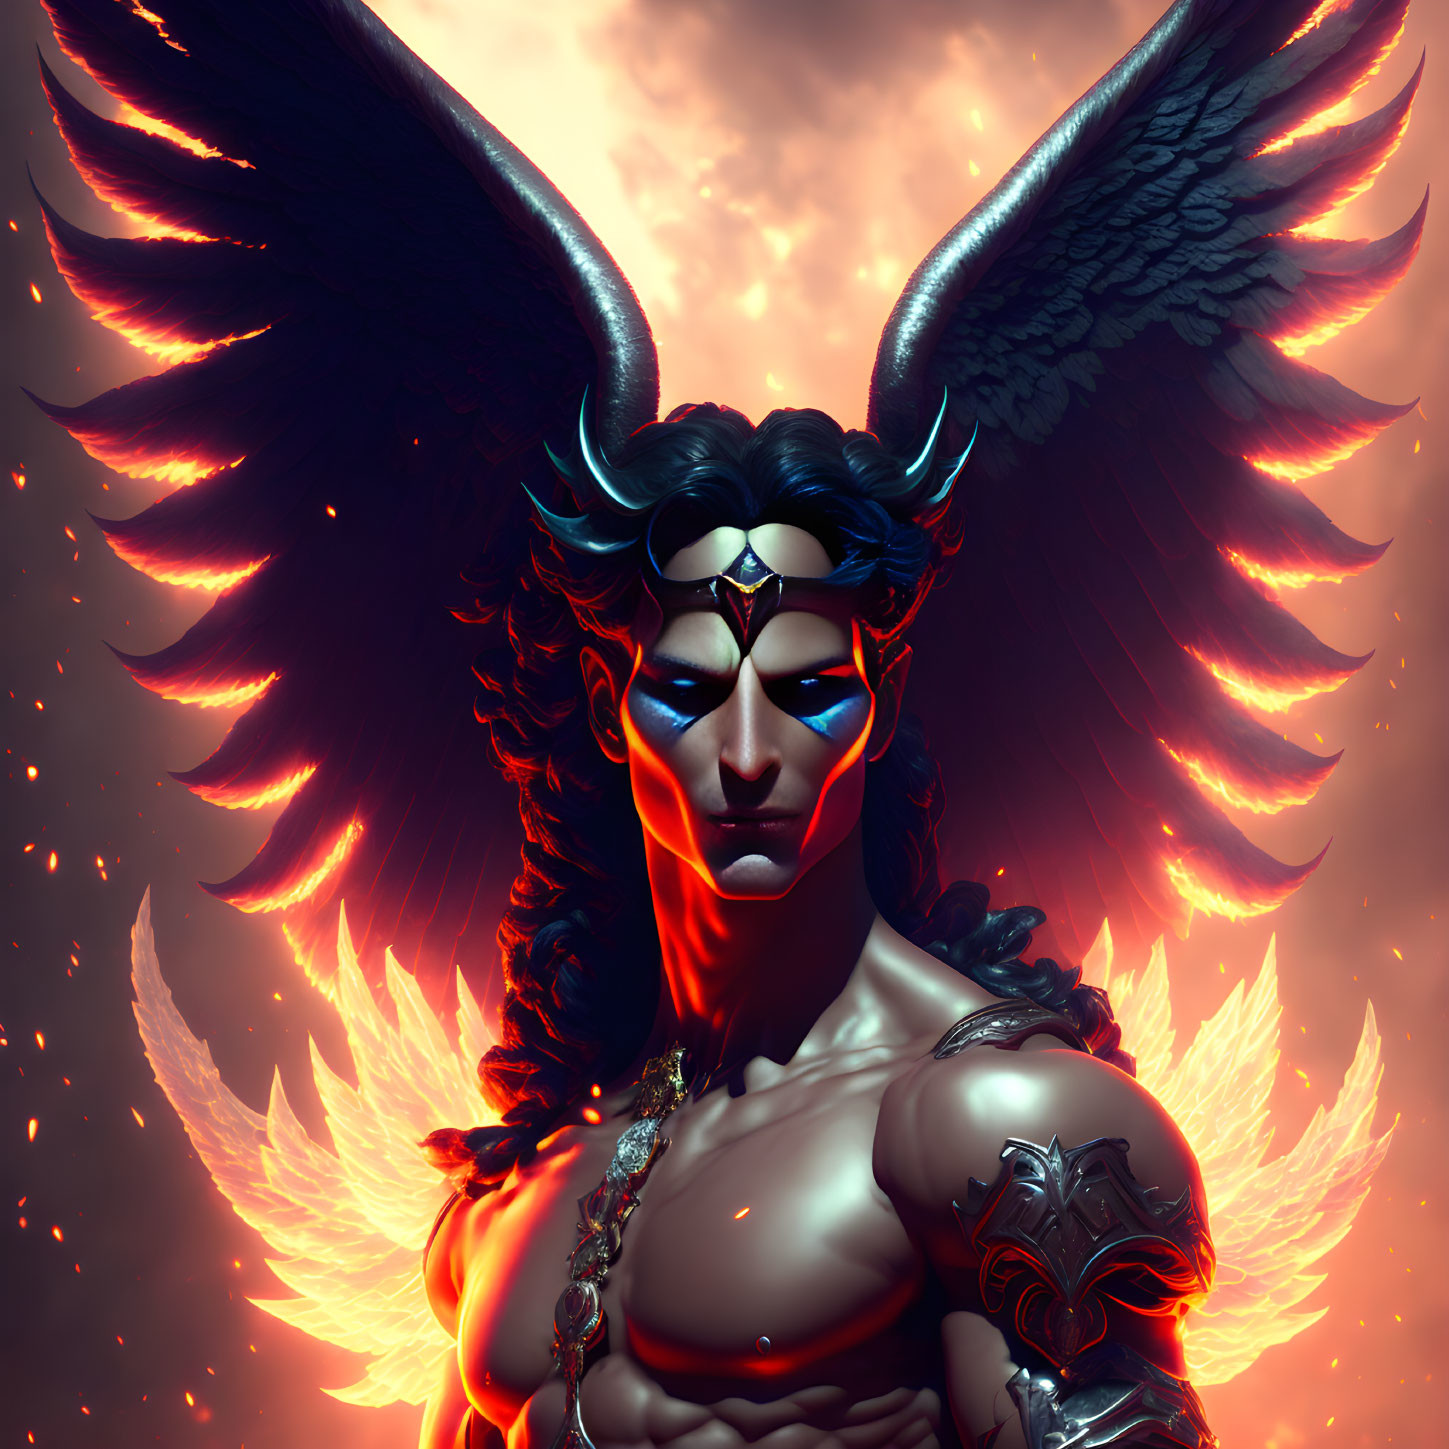 Mythical being with black wings and red eyes in fiery setting